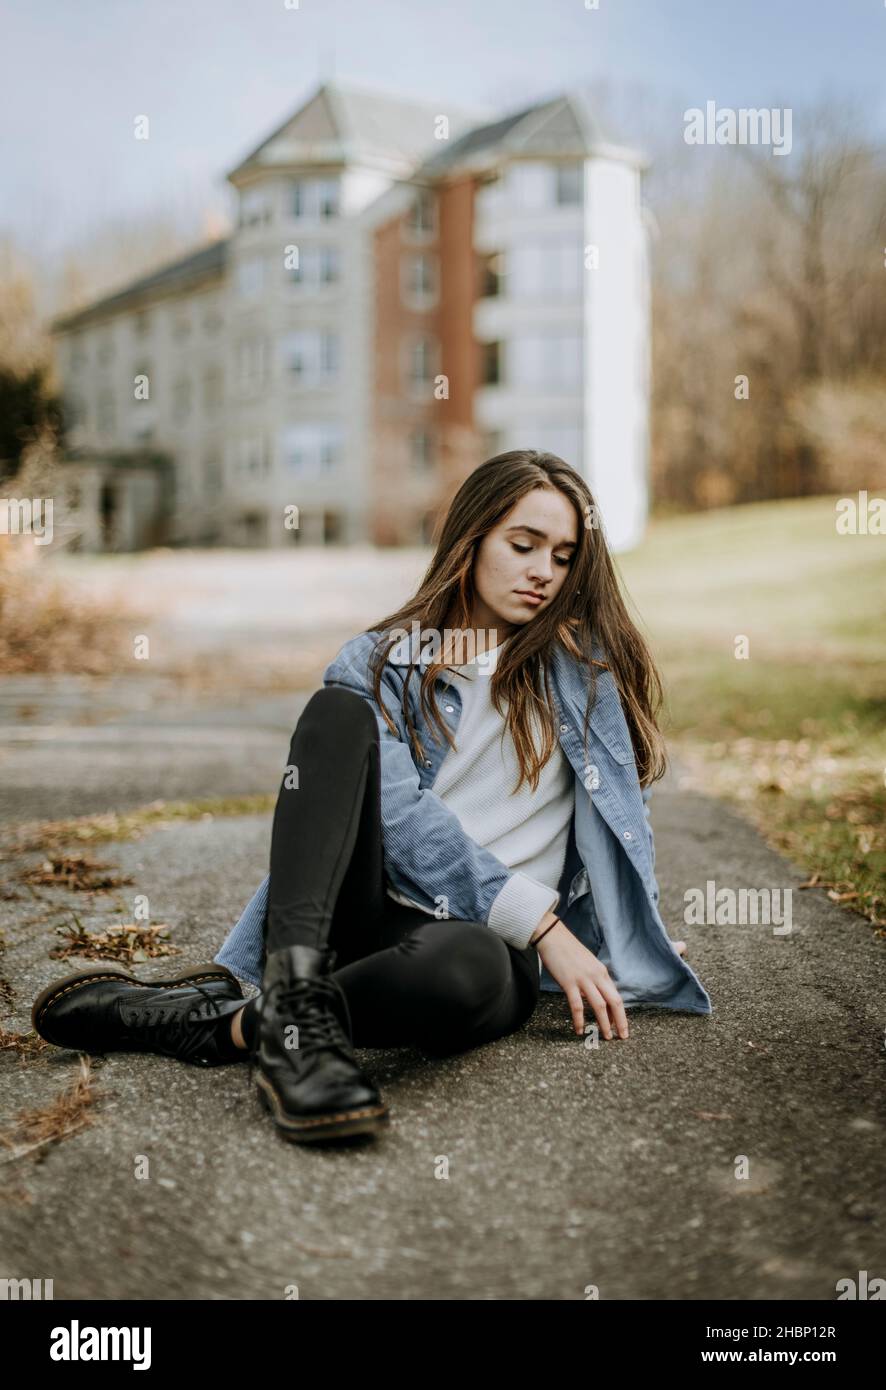 teenager sits on ground pavement looking sad thoughtful depressed Stock Photo